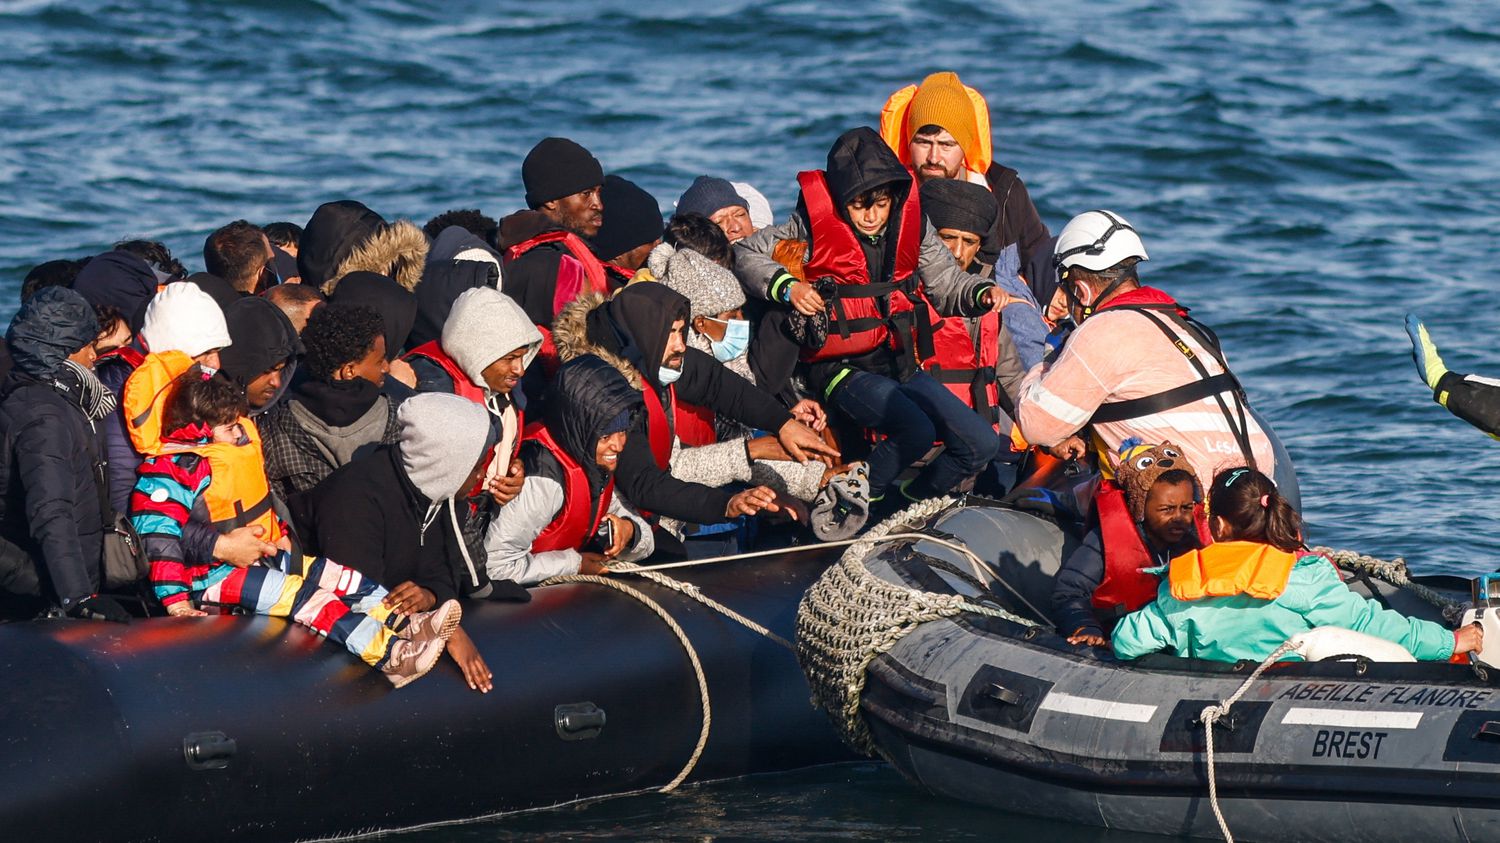 European Union: irregular entries up 82% from January to May, according to Frontex
